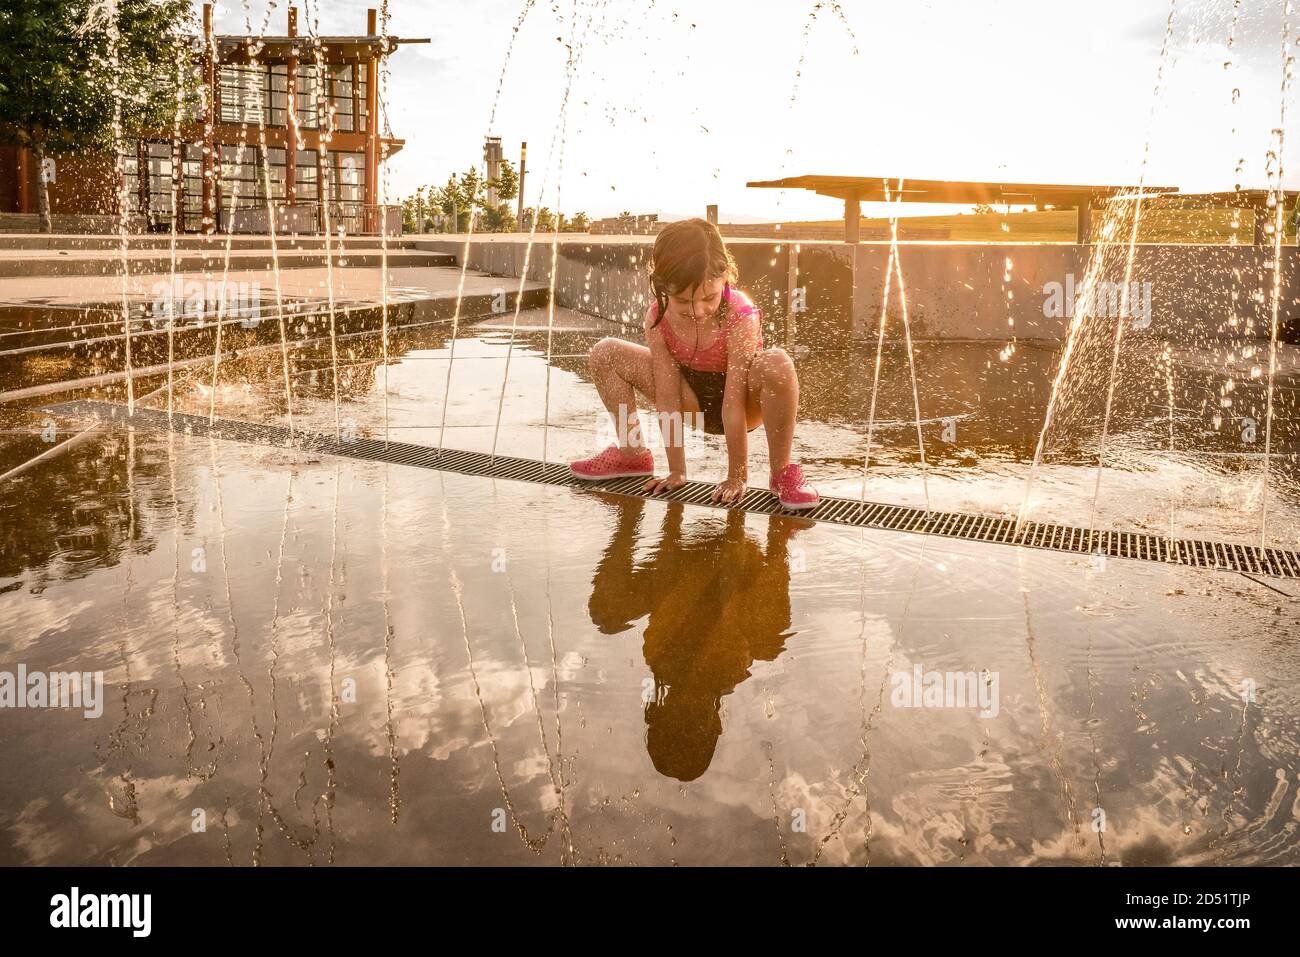 young girl in bathing suit squats over splash pad of squirting water Stock Photo